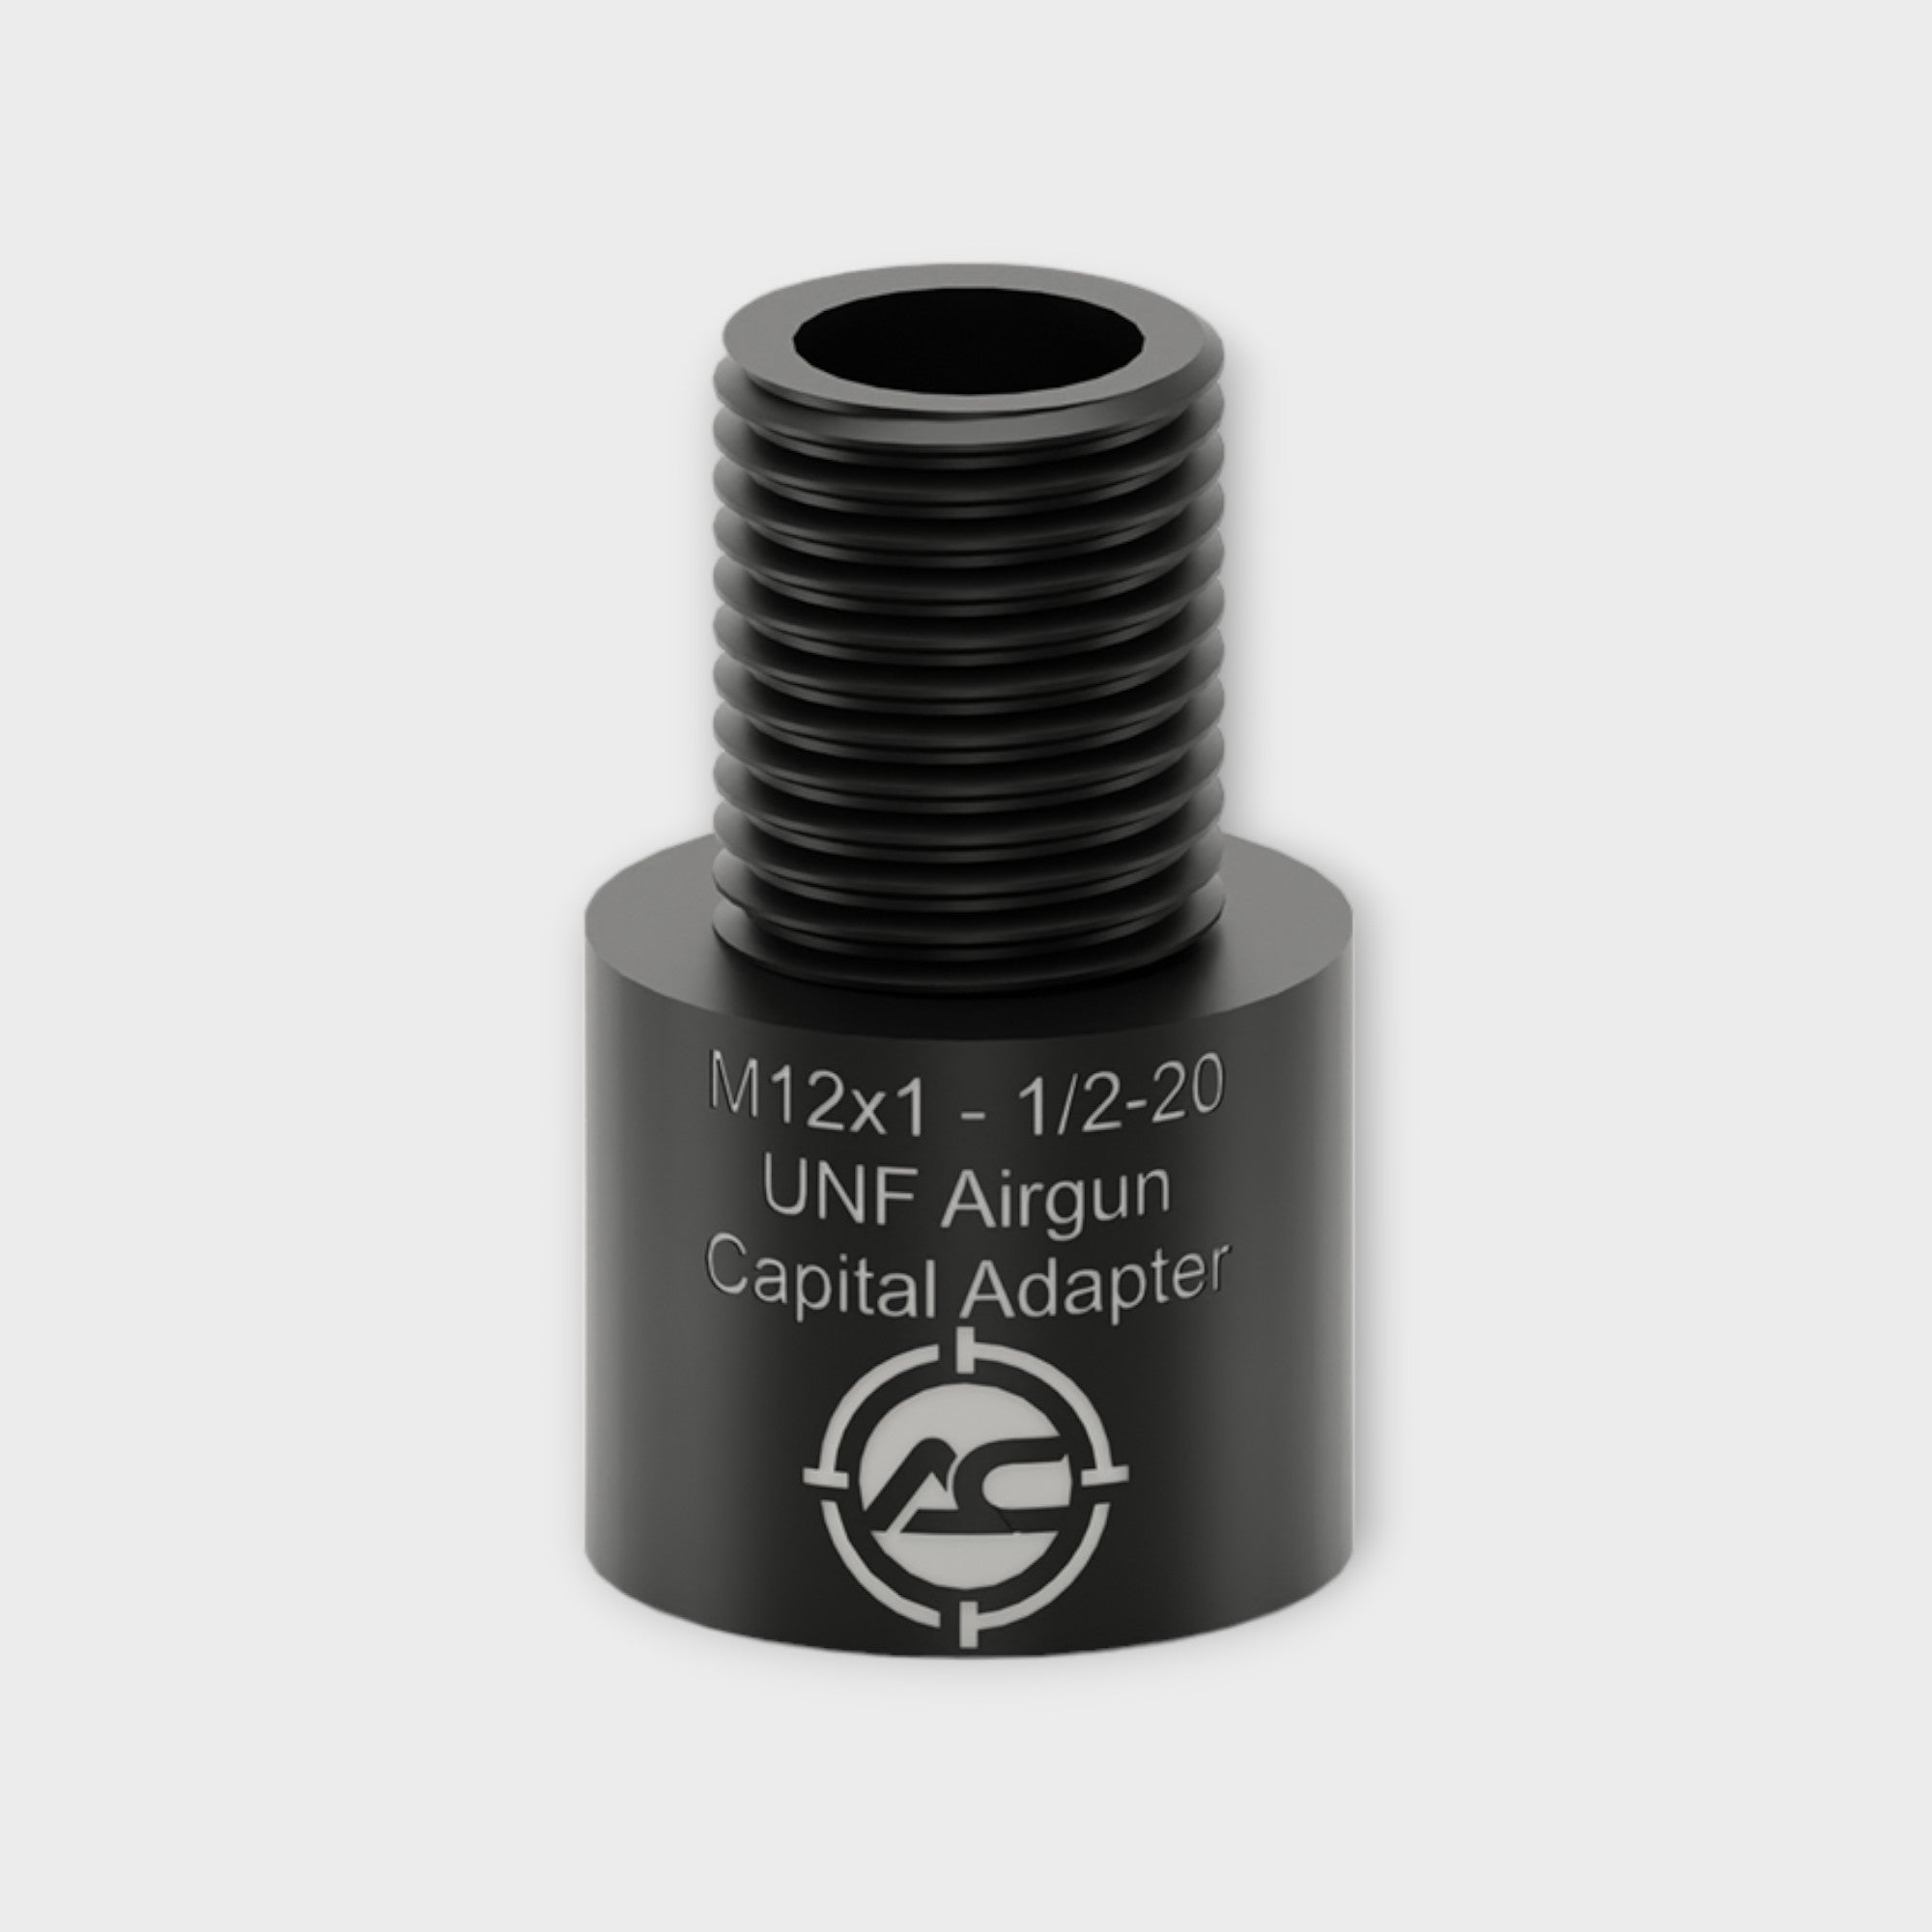 M12x1 to 1/2-20 UNF Adapter